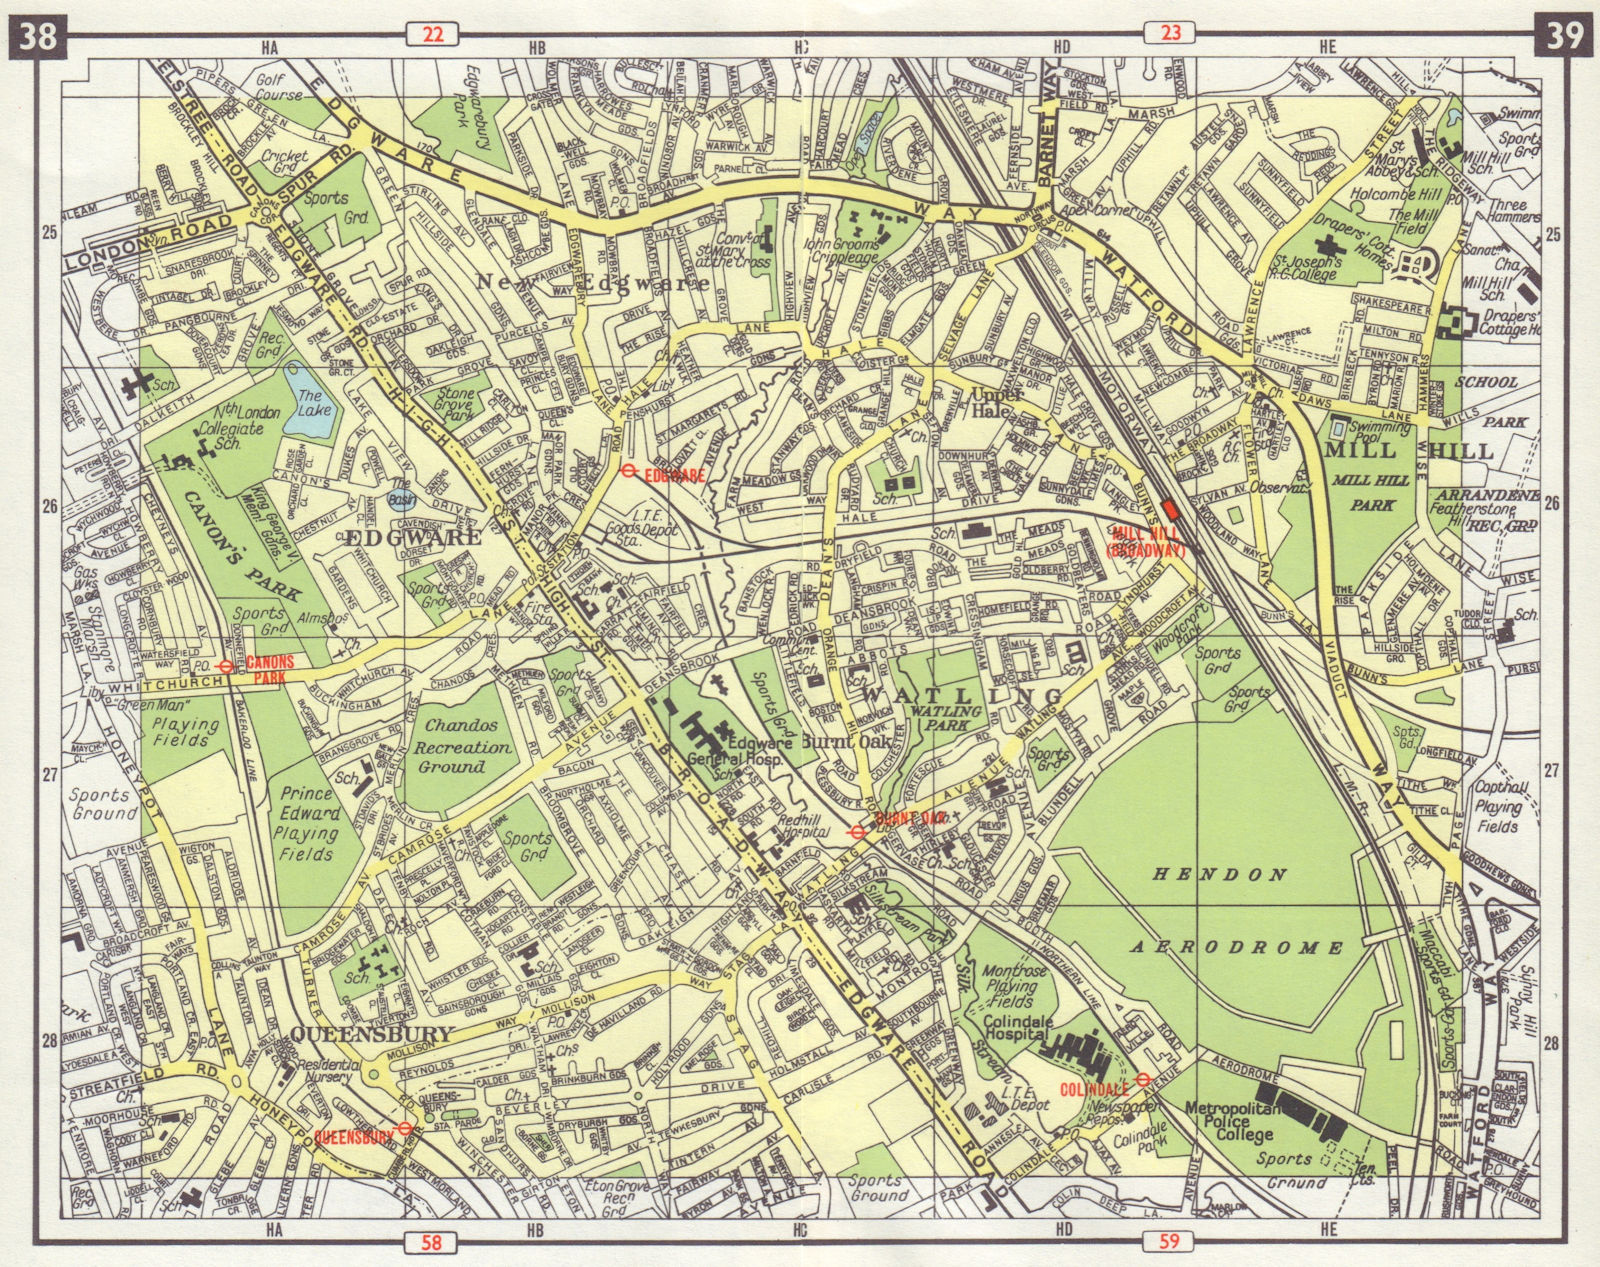 NW LONDON Edgware Mill Hill Burnt Oak Queensbury Colindale M1 open 1965 map